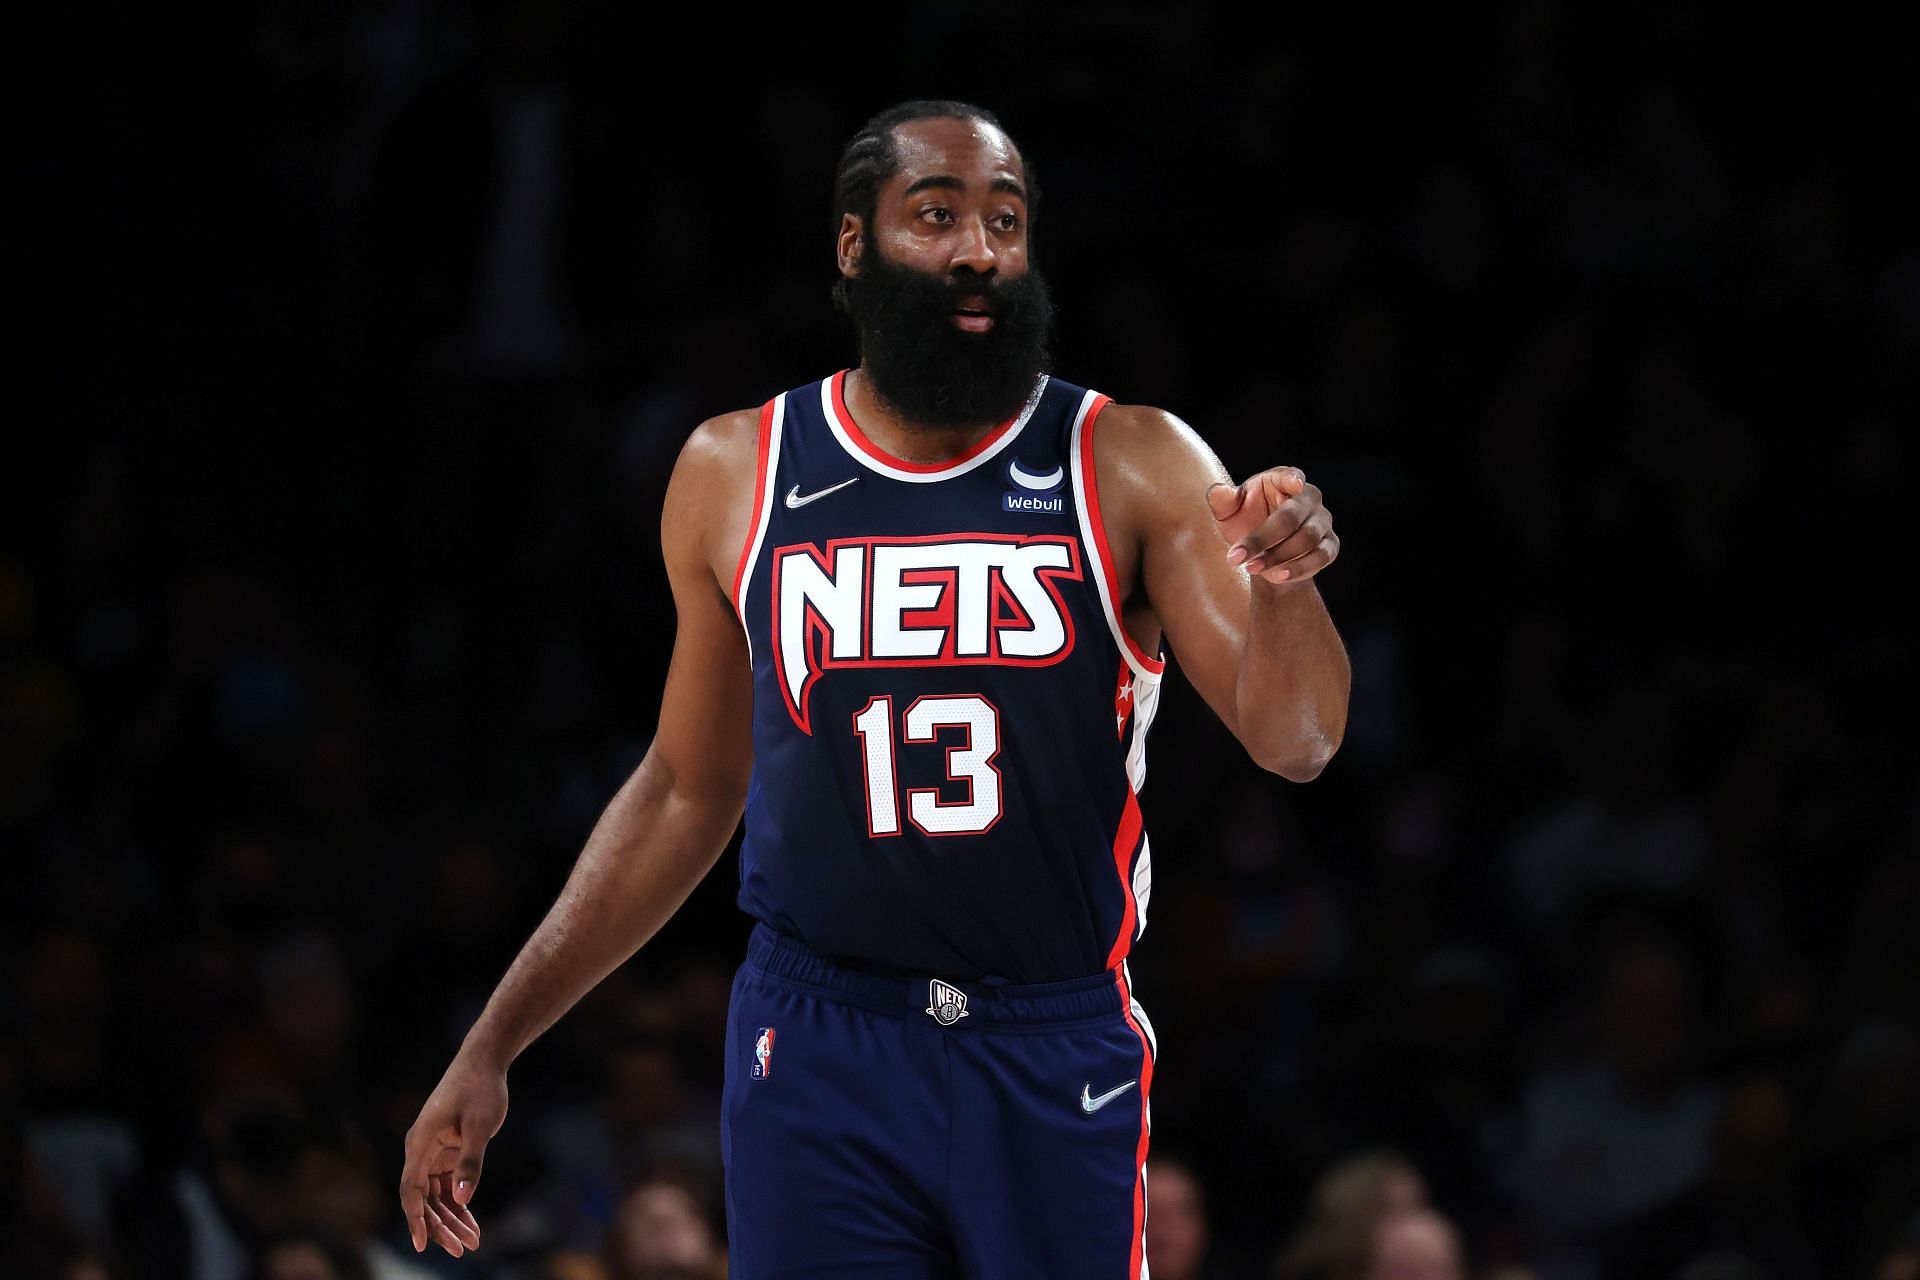 James Harden went off for 36 points to guide the Brooklyn Nets past the Orlando Magic on Friday night